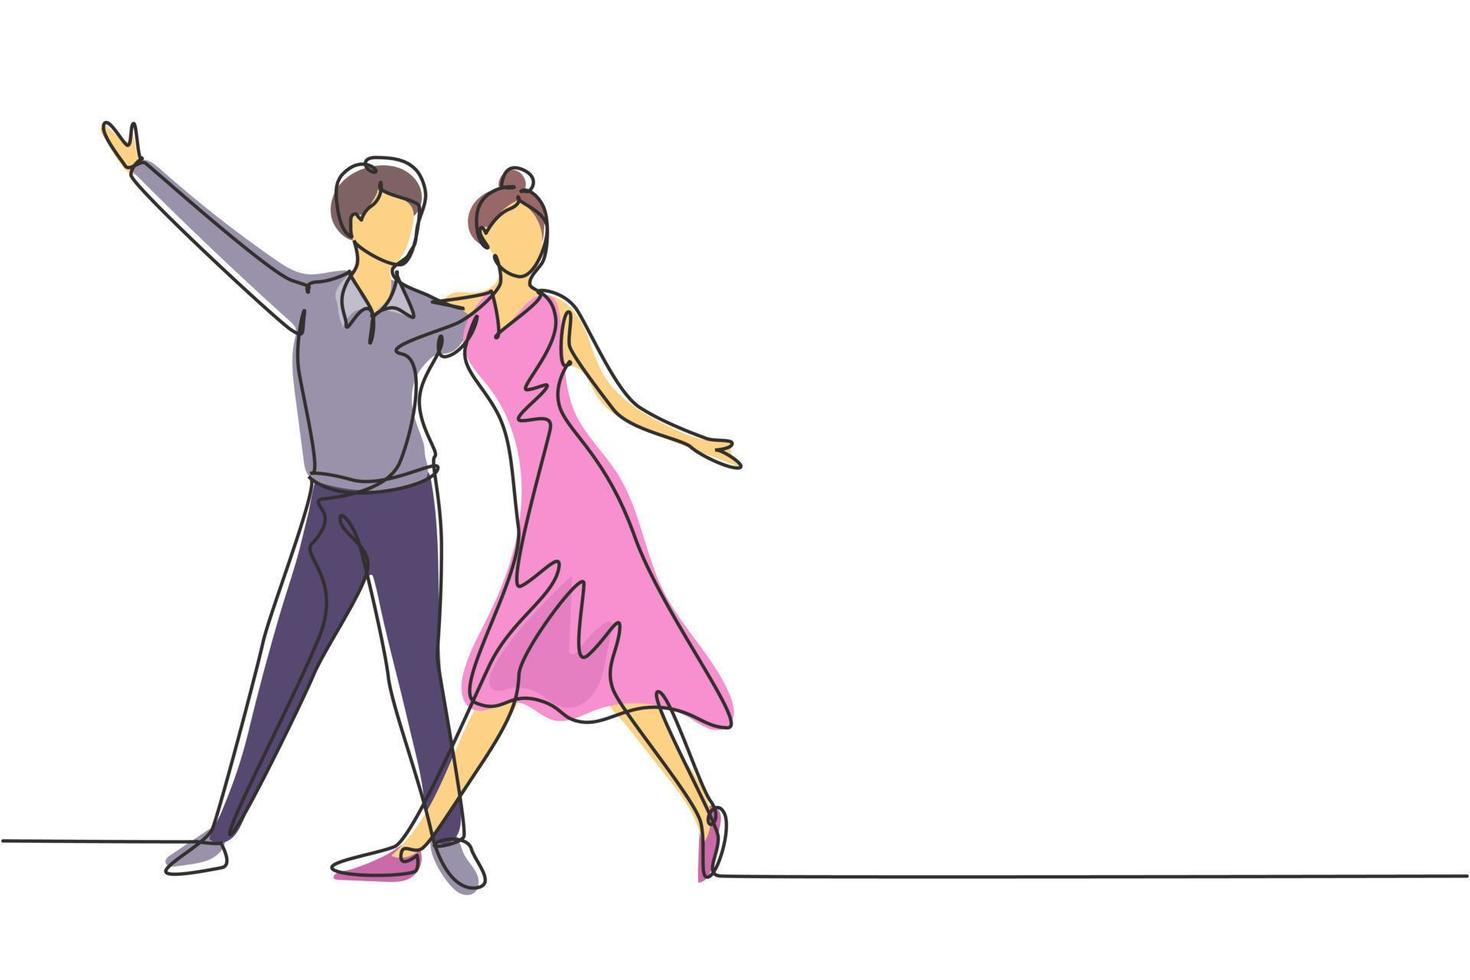 Continuous one line drawing male female professional dancer couple dancing tango, waltz dances together on dancing contest dancefloor. Fun activity. Single line draw design vector graphic illustration